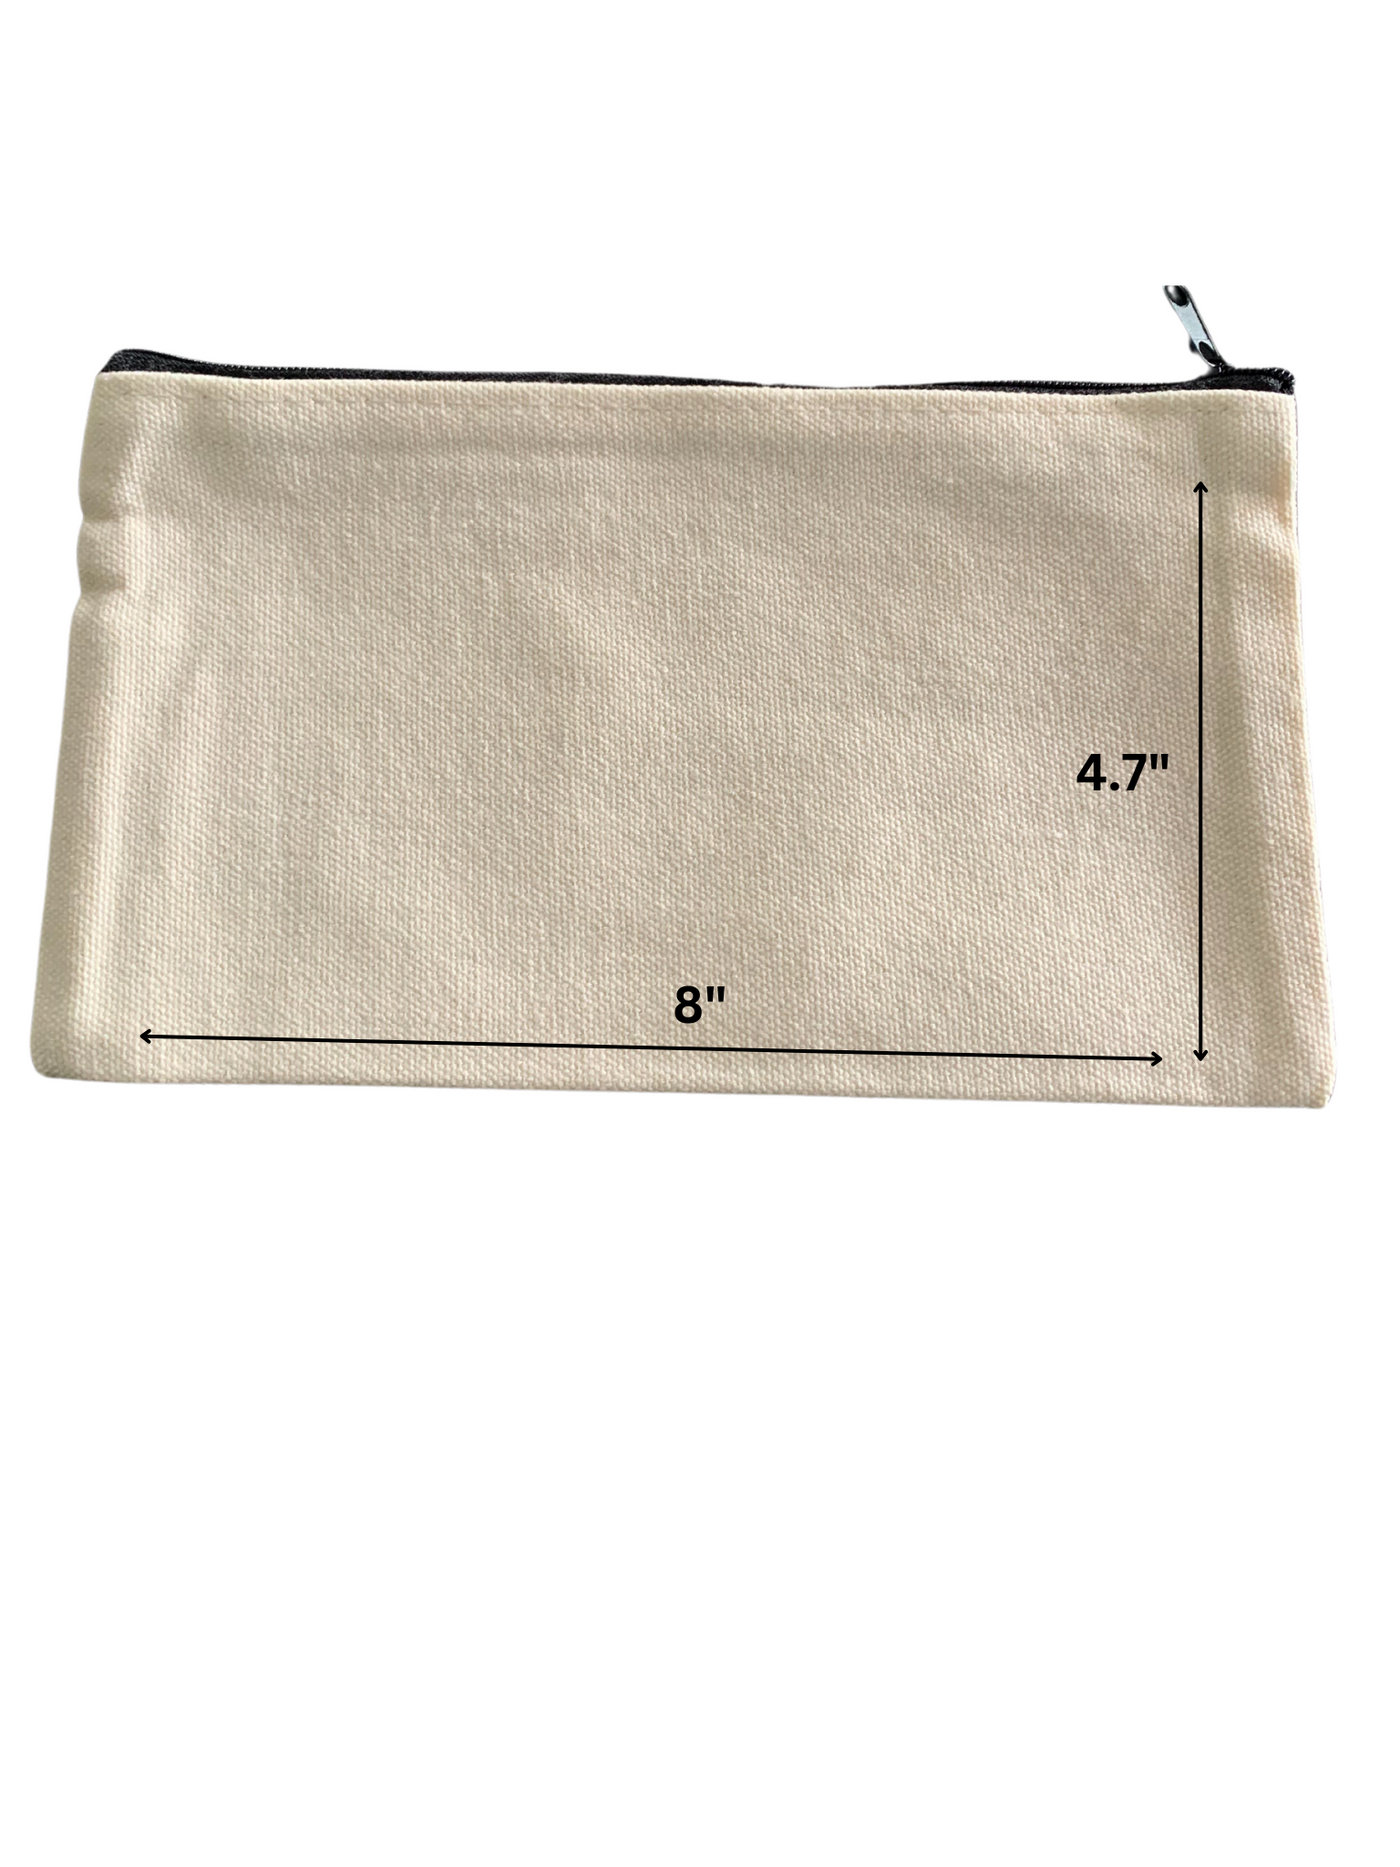 The canvas zippered Mini Klipster Storage Pouch is the perfect way to hold your Mini Klipster and keep your hair accessories protected. It is 8" wide and 4.7" high.